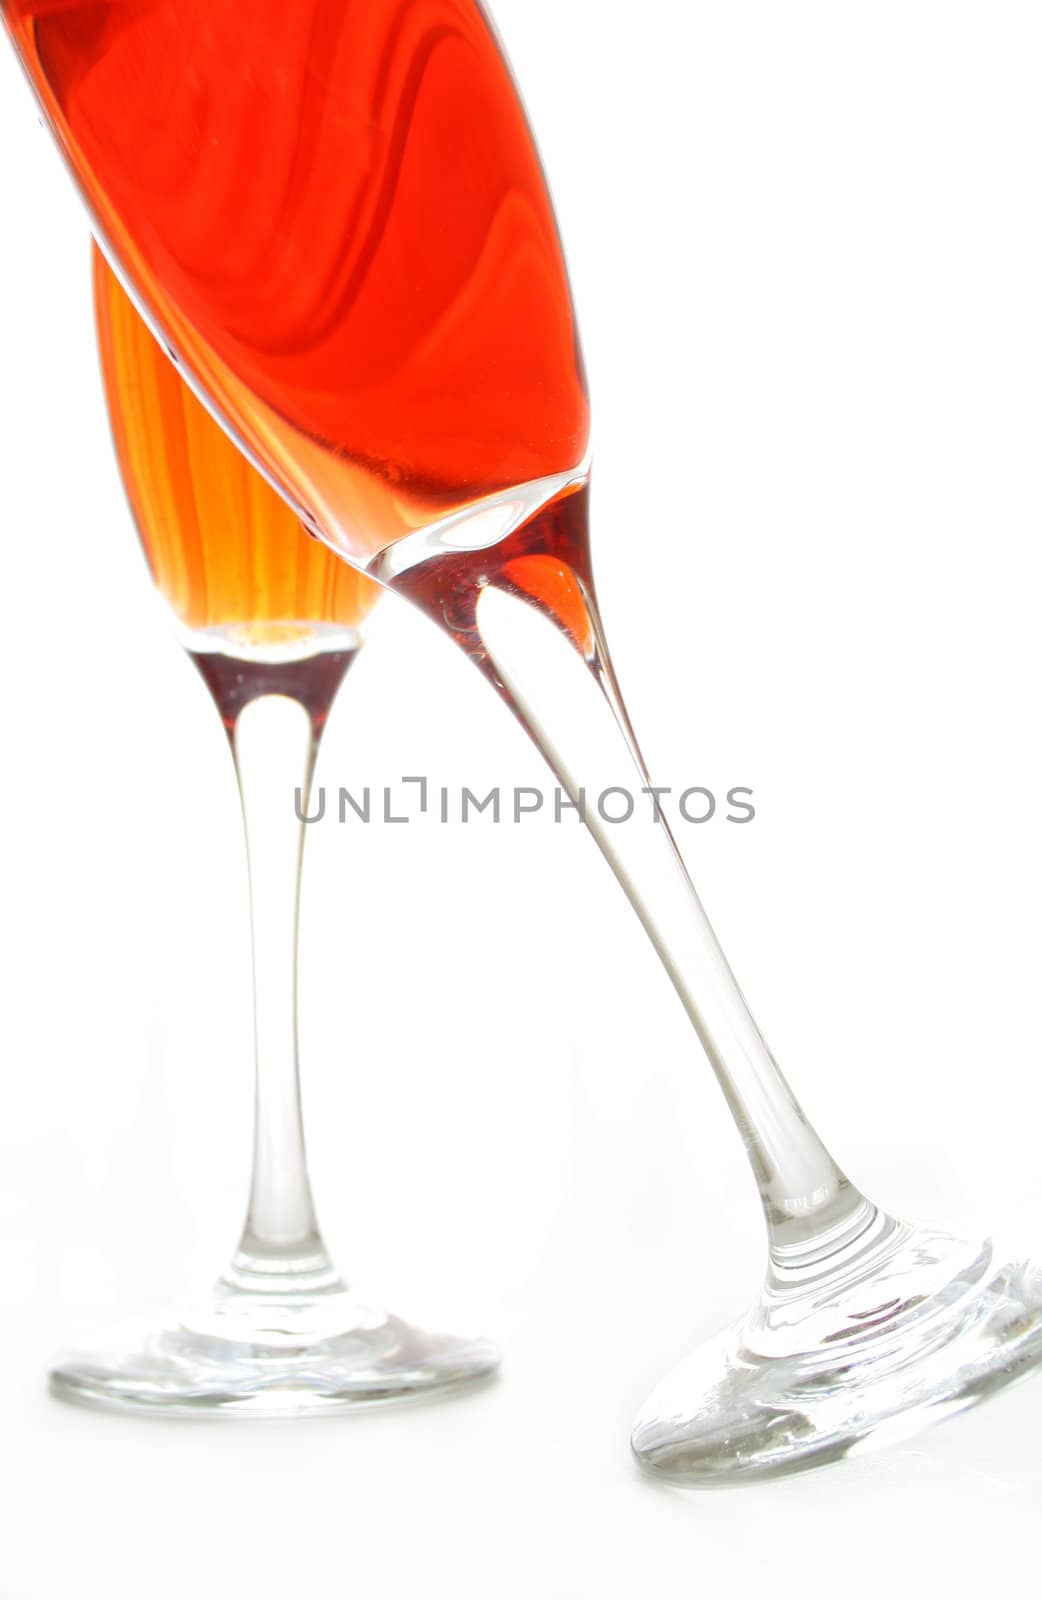 Two wine glasses full of wine and one glass leaning into the other. All isolated on a white background.